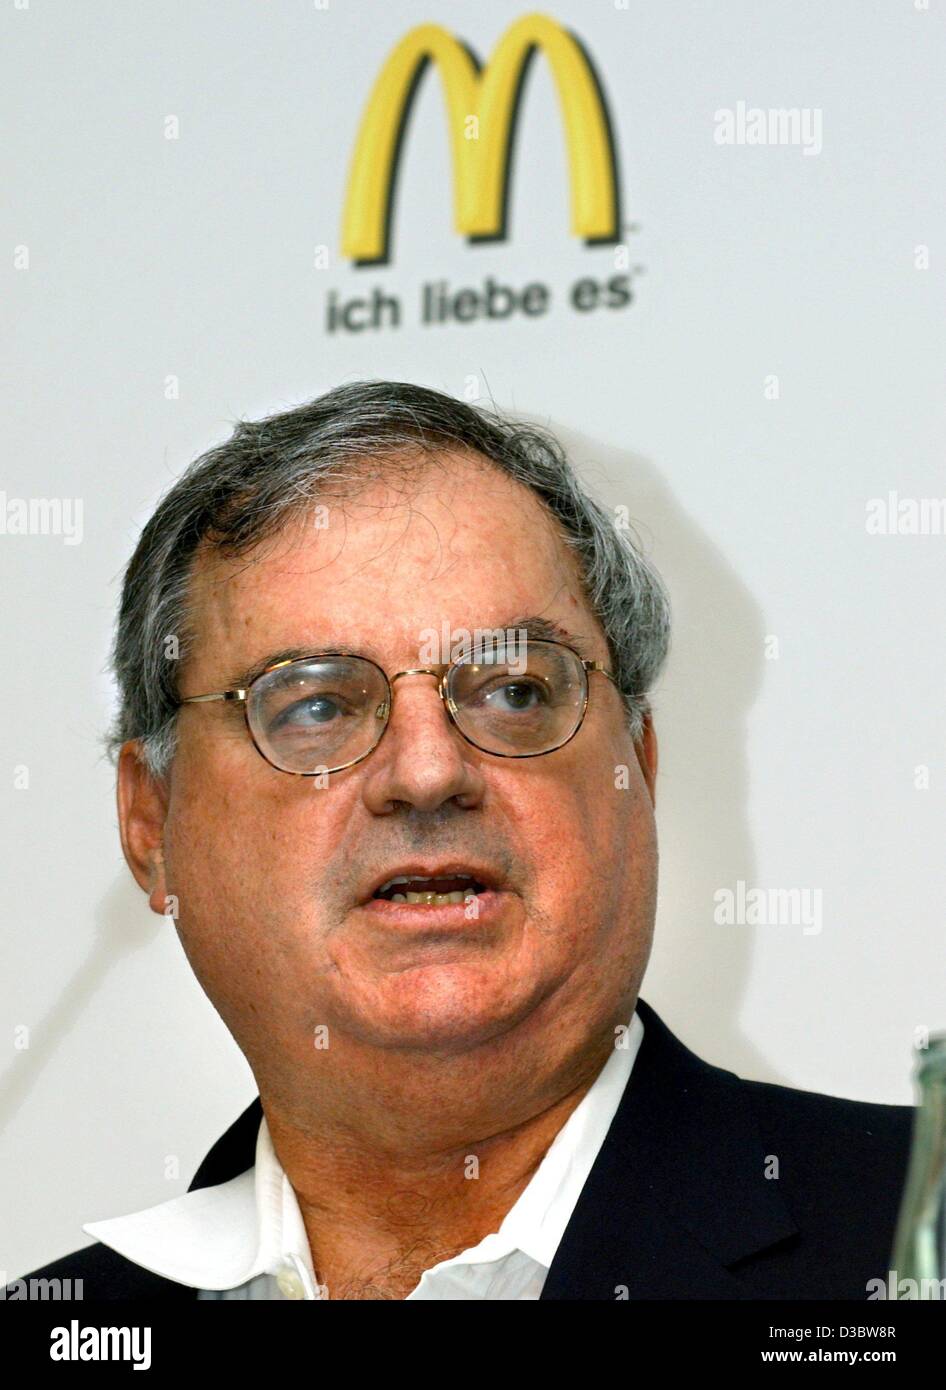 (dpa) - Larry Light, Vice President of the fast food chain McDonald's, poses in front of the new logo during a press conference in Munich, 2 September 2003. The slogan 'ich liebe es' ('i'm lovin' it') will soon make its way into the vocabulary of McDonald's customers in more than 100 countries as th Stock Photo